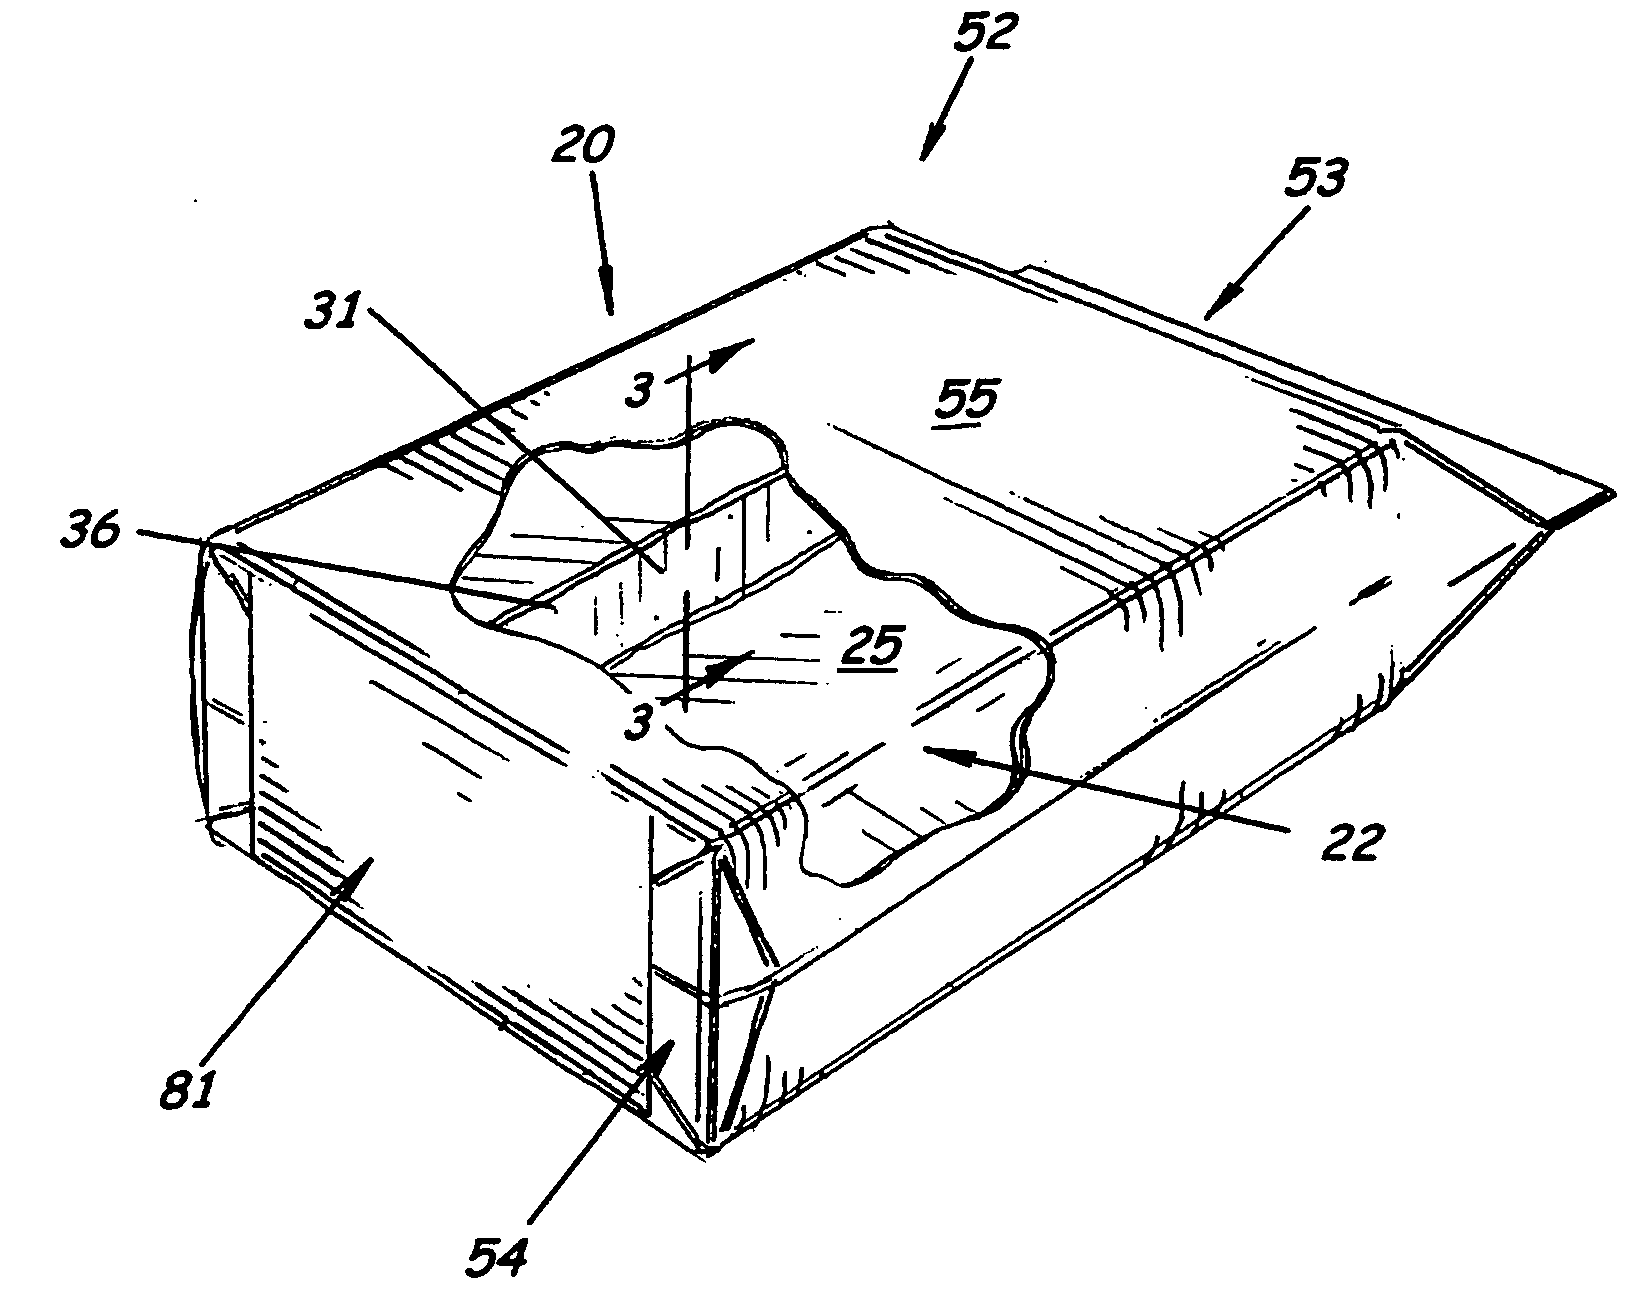 Method of forming a vented bag